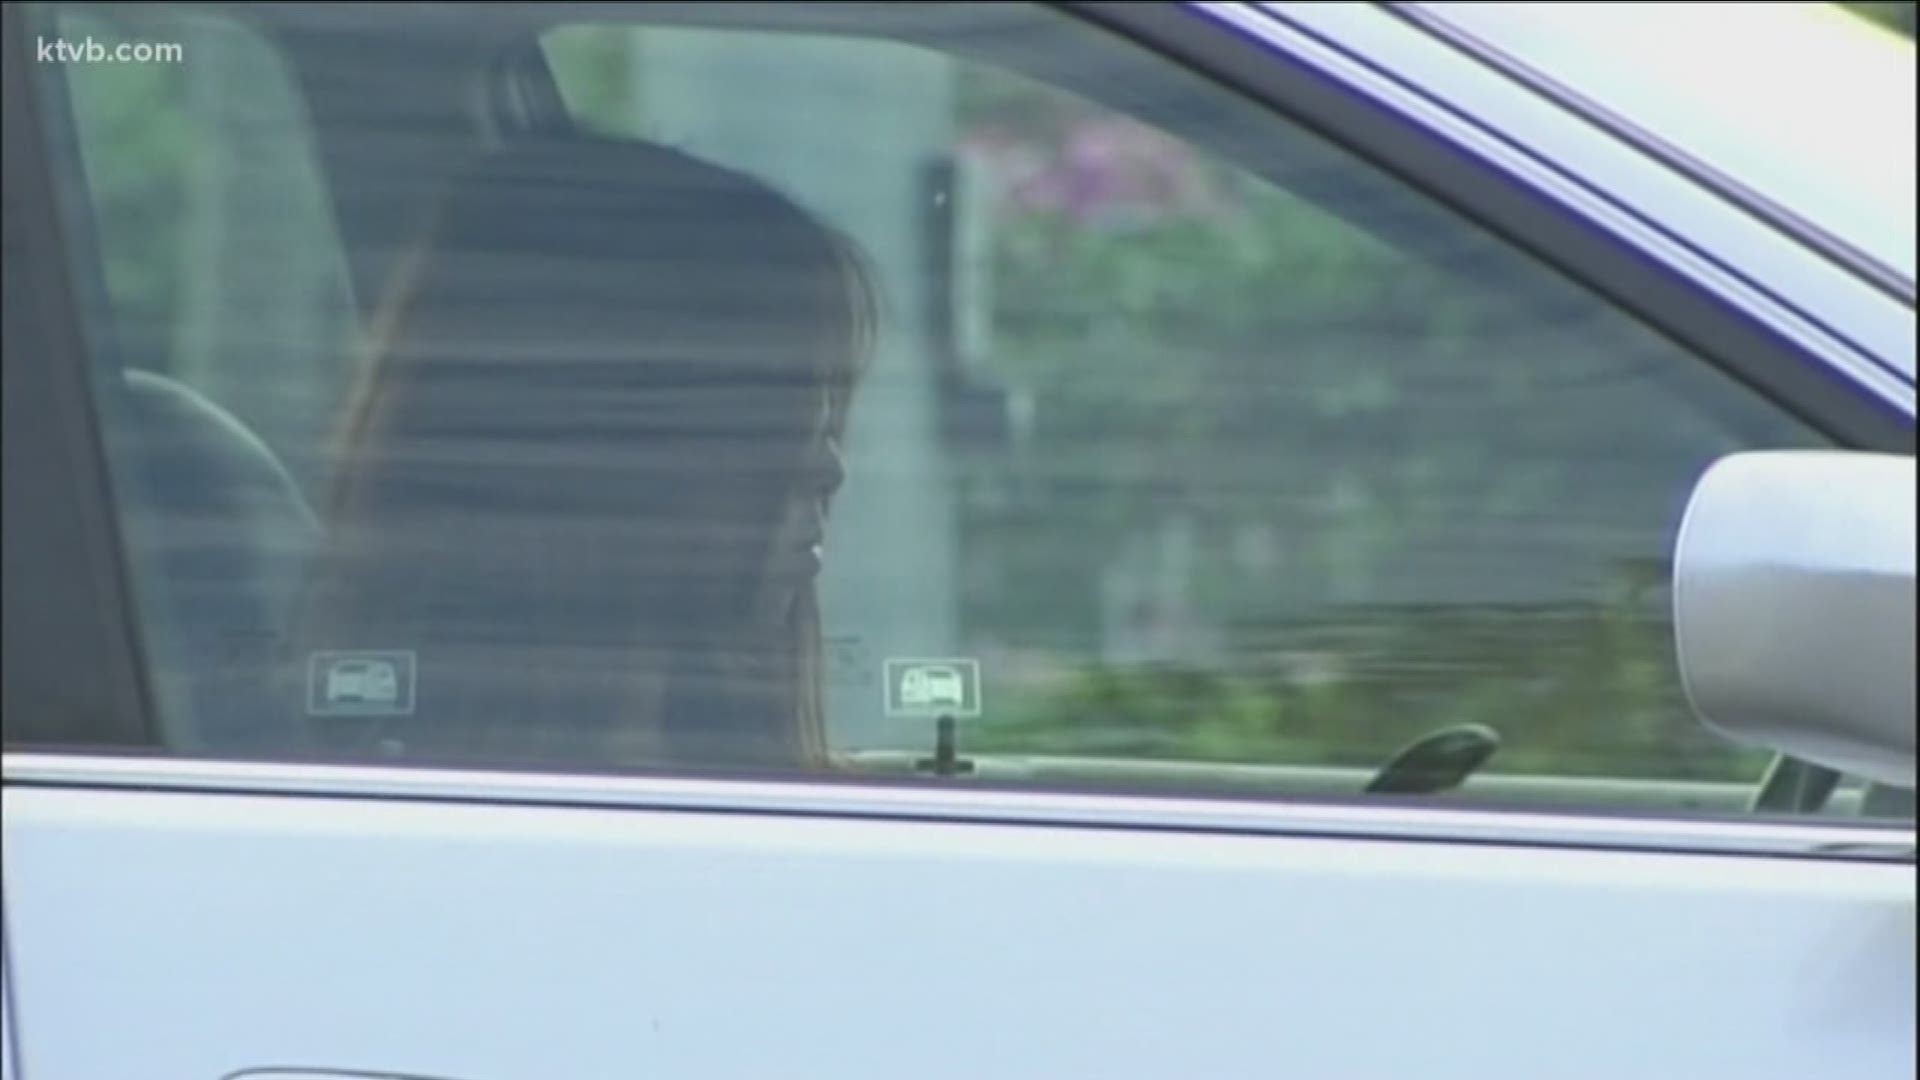 The city could implement a 'hands-free' ordinance.